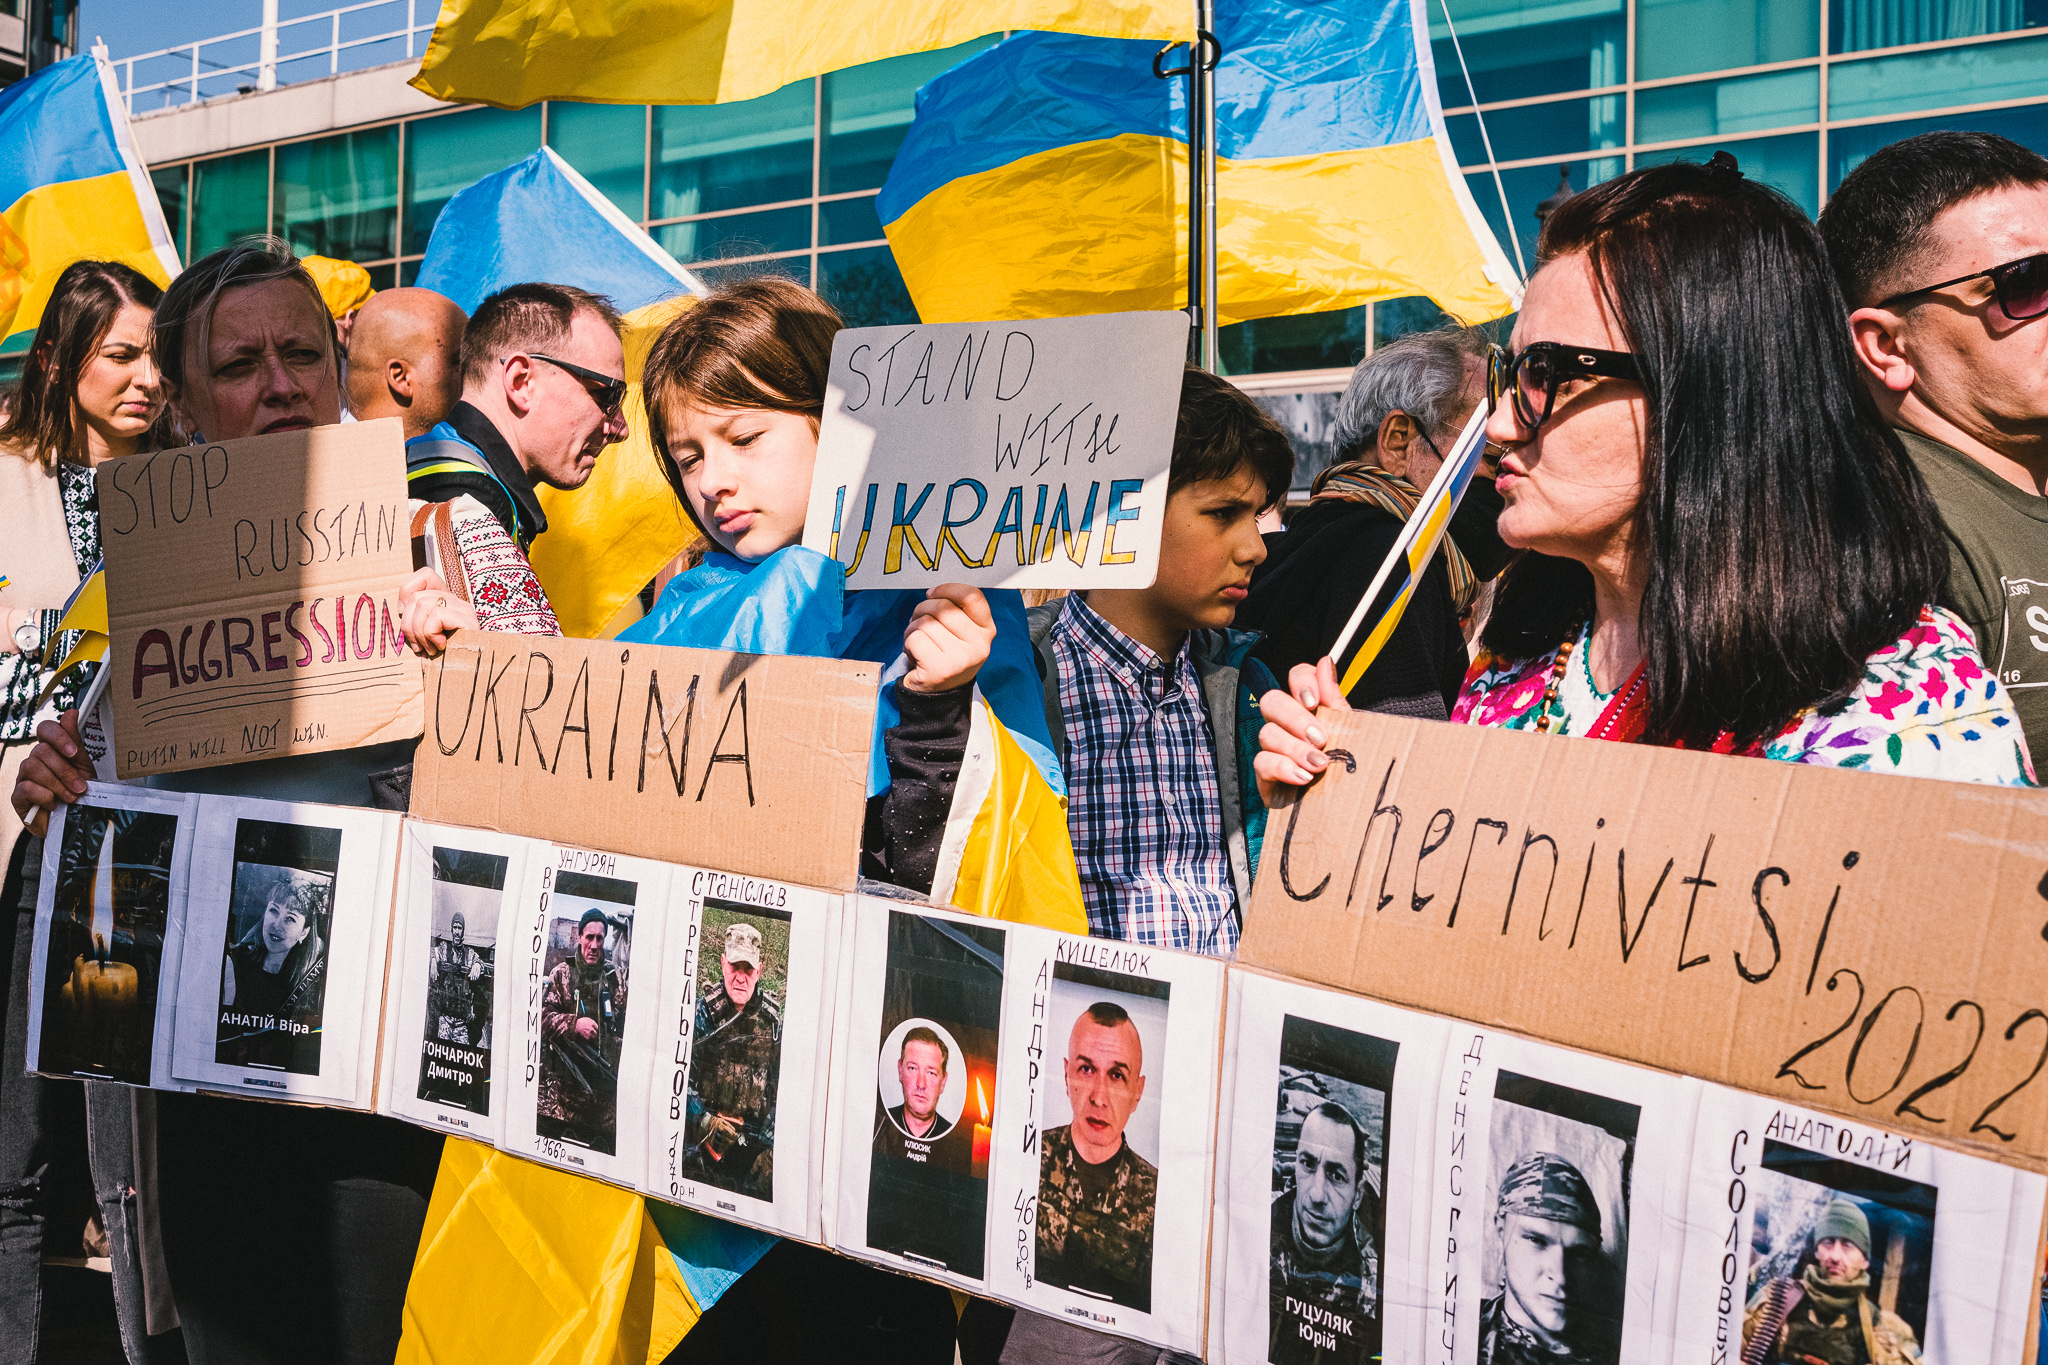 A group of protesters holding banners at solidarity march with Ukraine in London on the 26th of March 2022